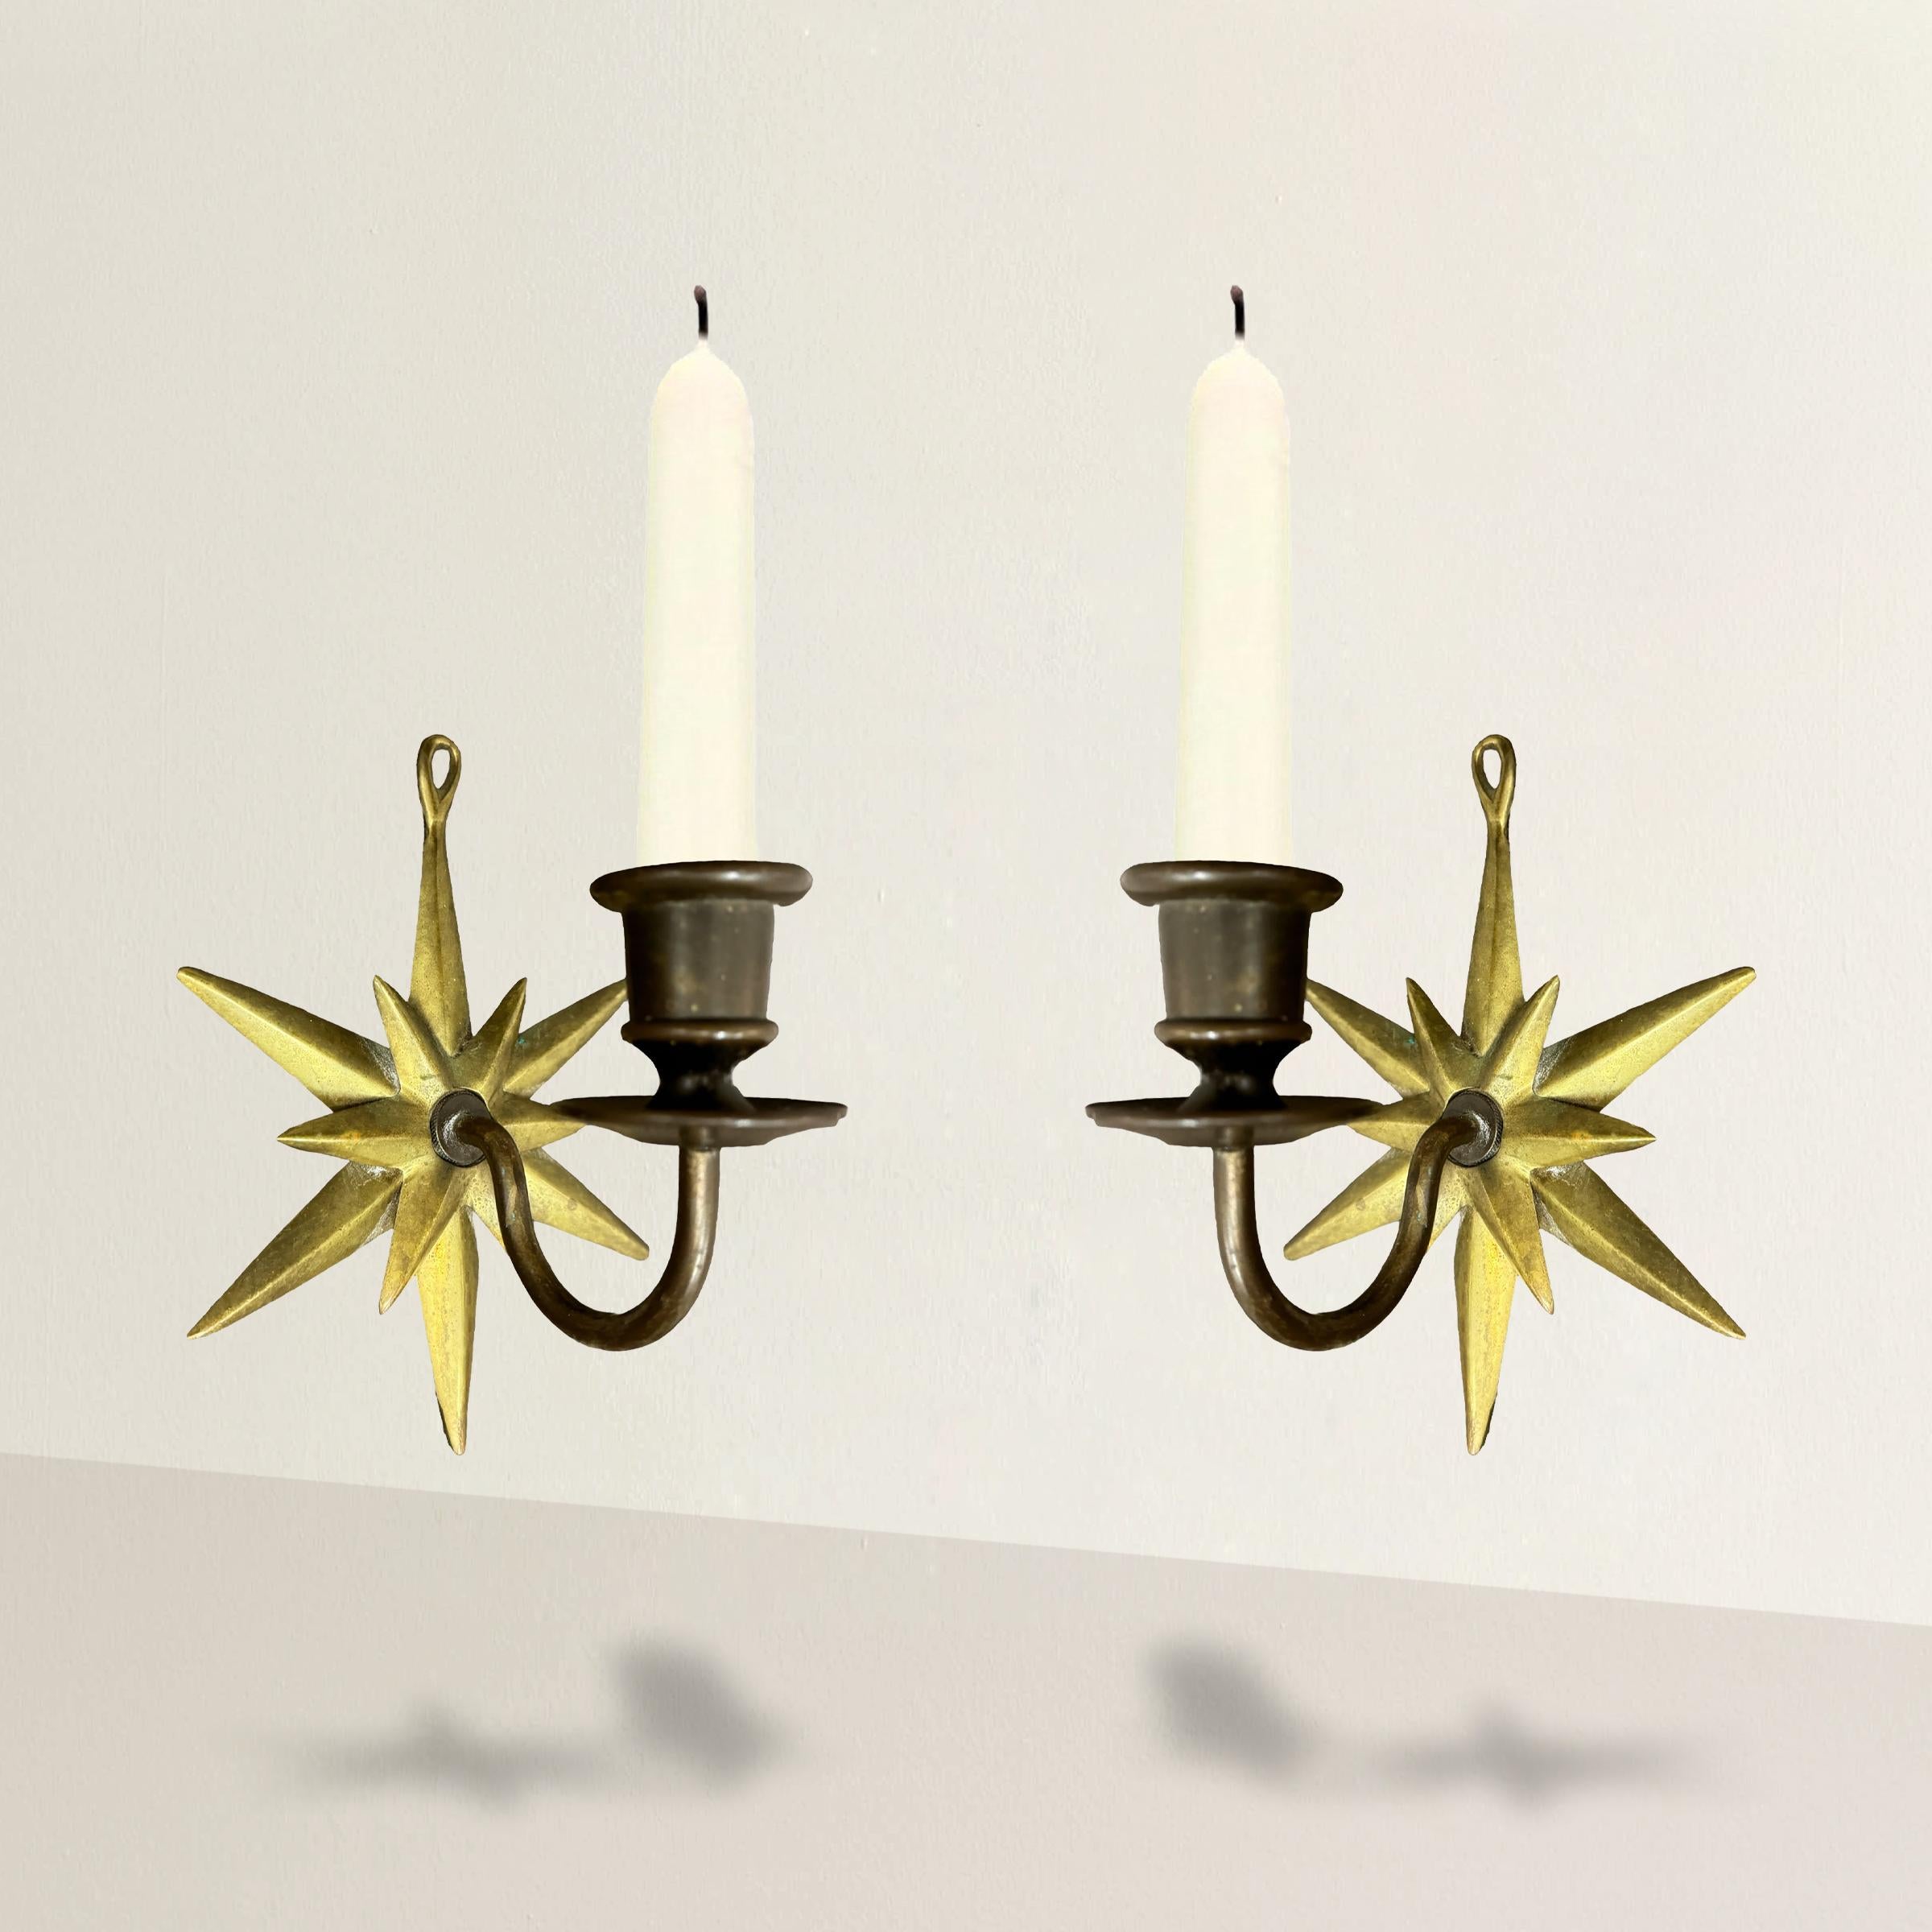 These early 20th-century French candle sconces are a stunning example of timeless elegance and craftsmanship. Featuring beautiful gold twelve-point star backplates and patinated bronze scrolled arms, these sconces exude sophistication and